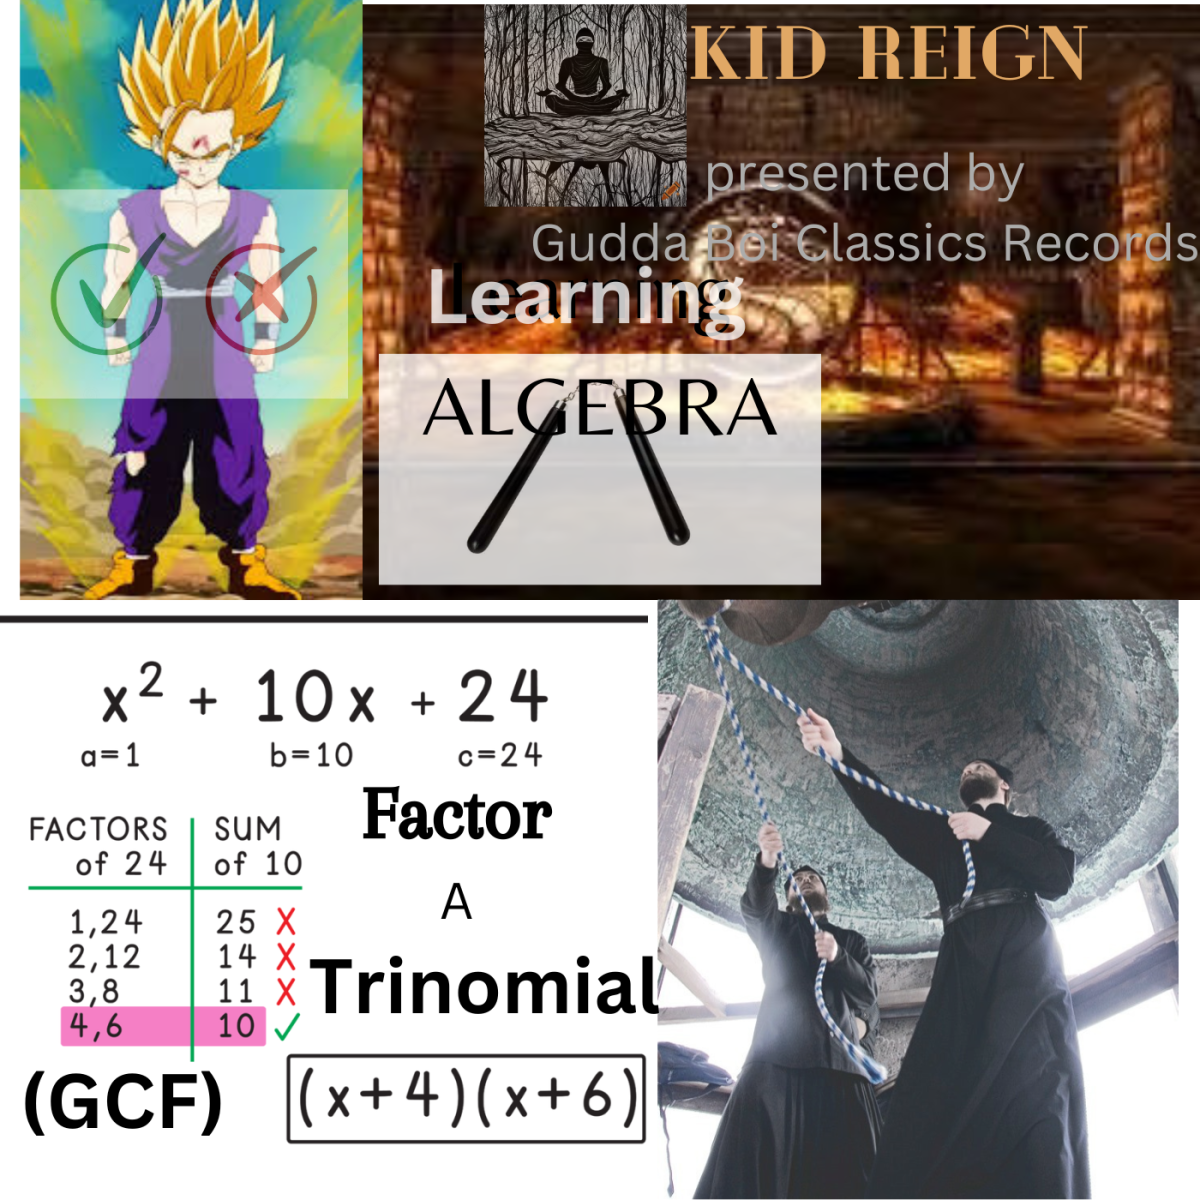 Summary: Factoring a  Trinomial and GCF - by Kid Reign - presented by Gudda Boi Classics Records